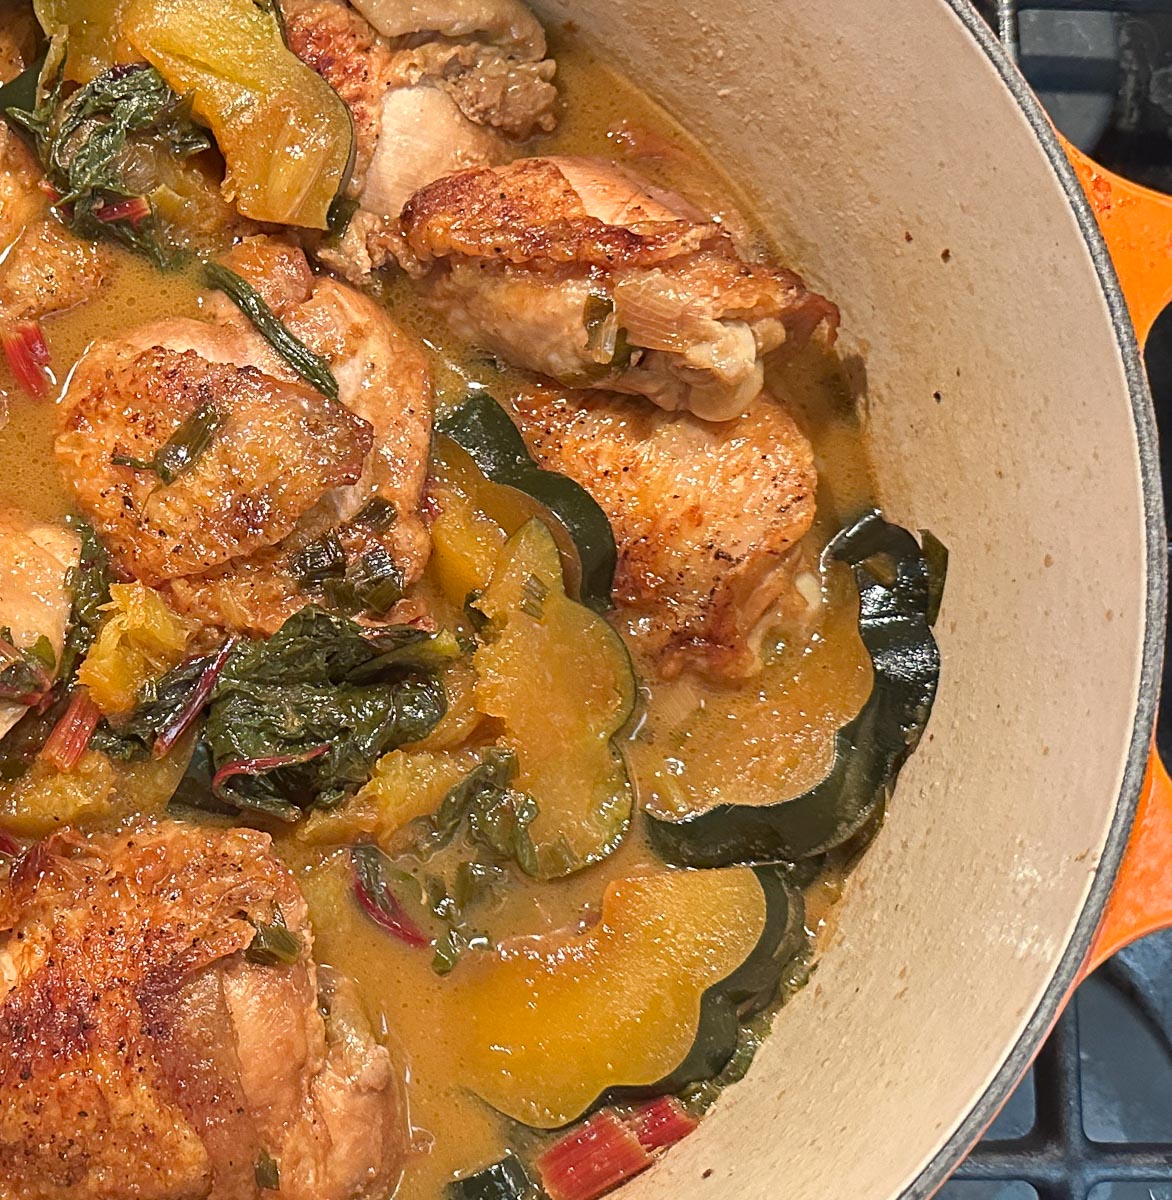 portion of One-Pot Low FODMAP Braised Chicken with Swiss Chard and Acorn Squash in pot on stove.